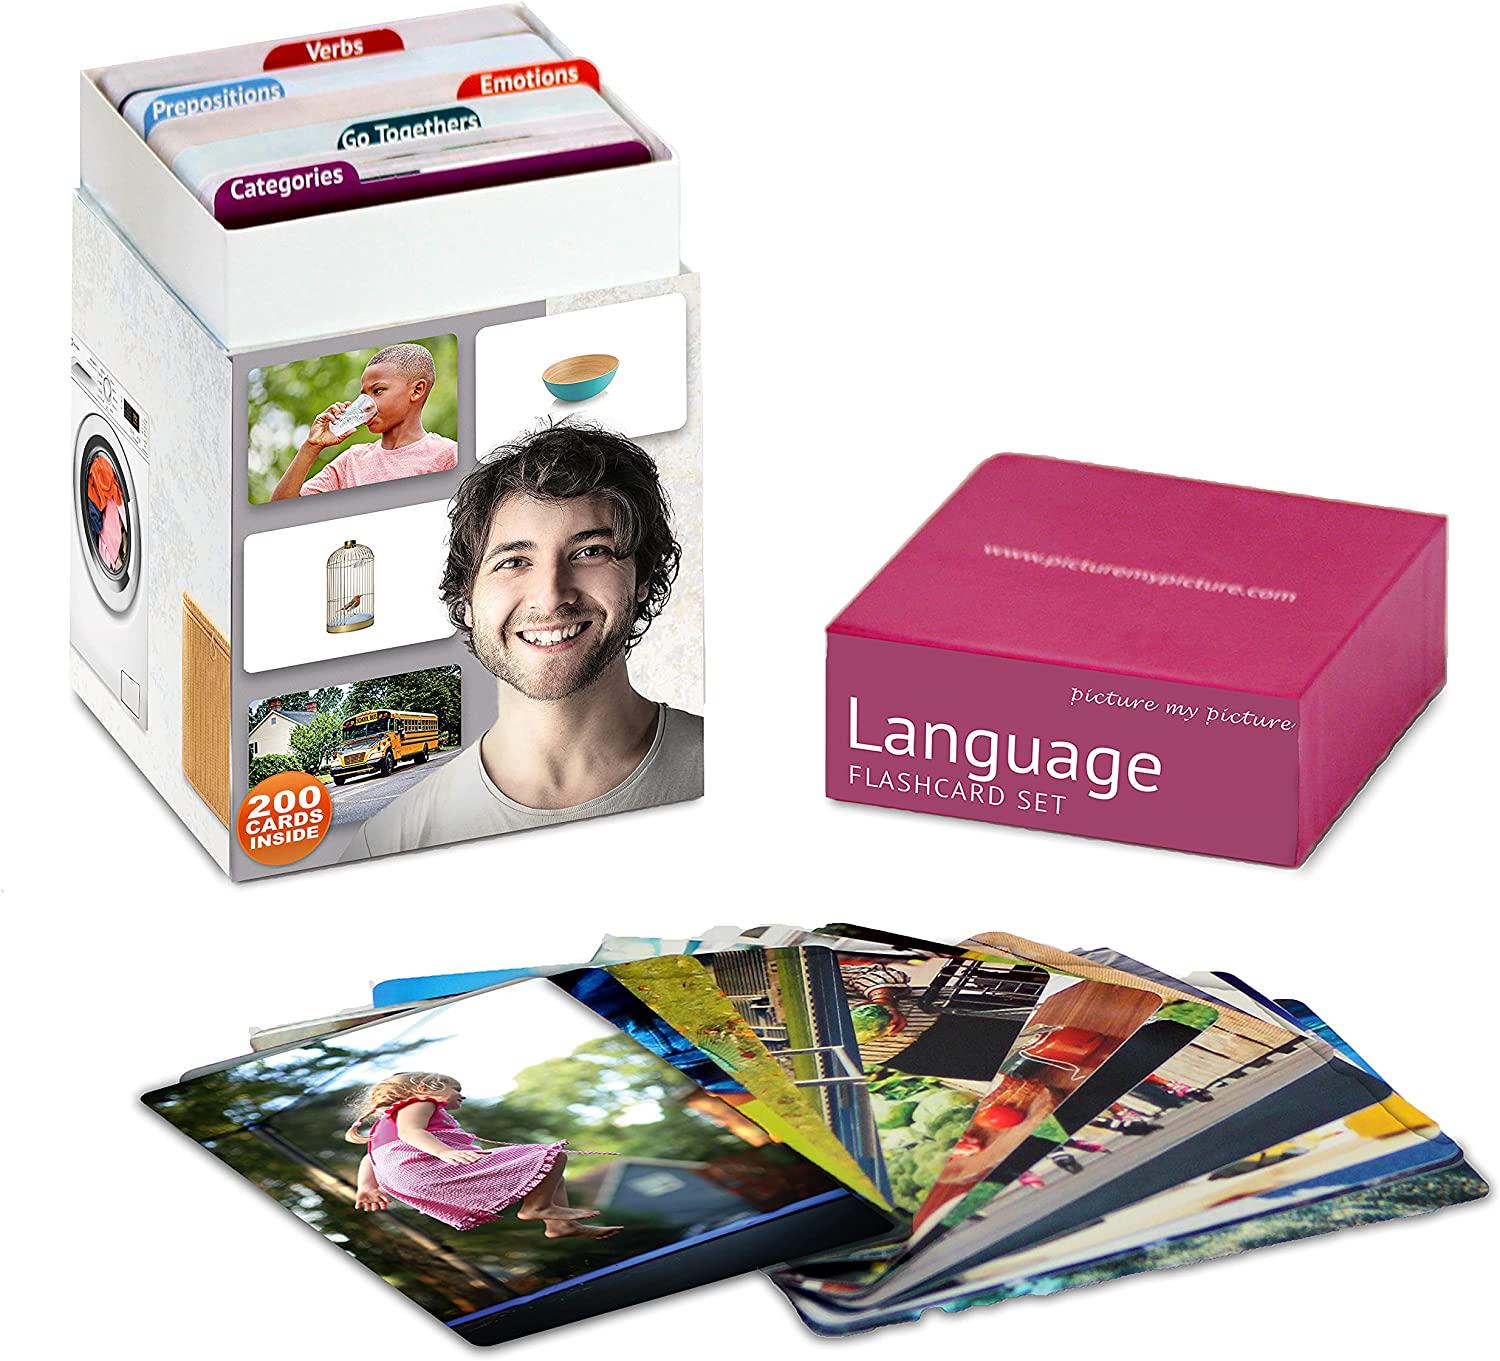 Picture My Picture, Language Flash Card Set | 200 Language Photo Cards | Speech Therapy Materials and ESL Materials